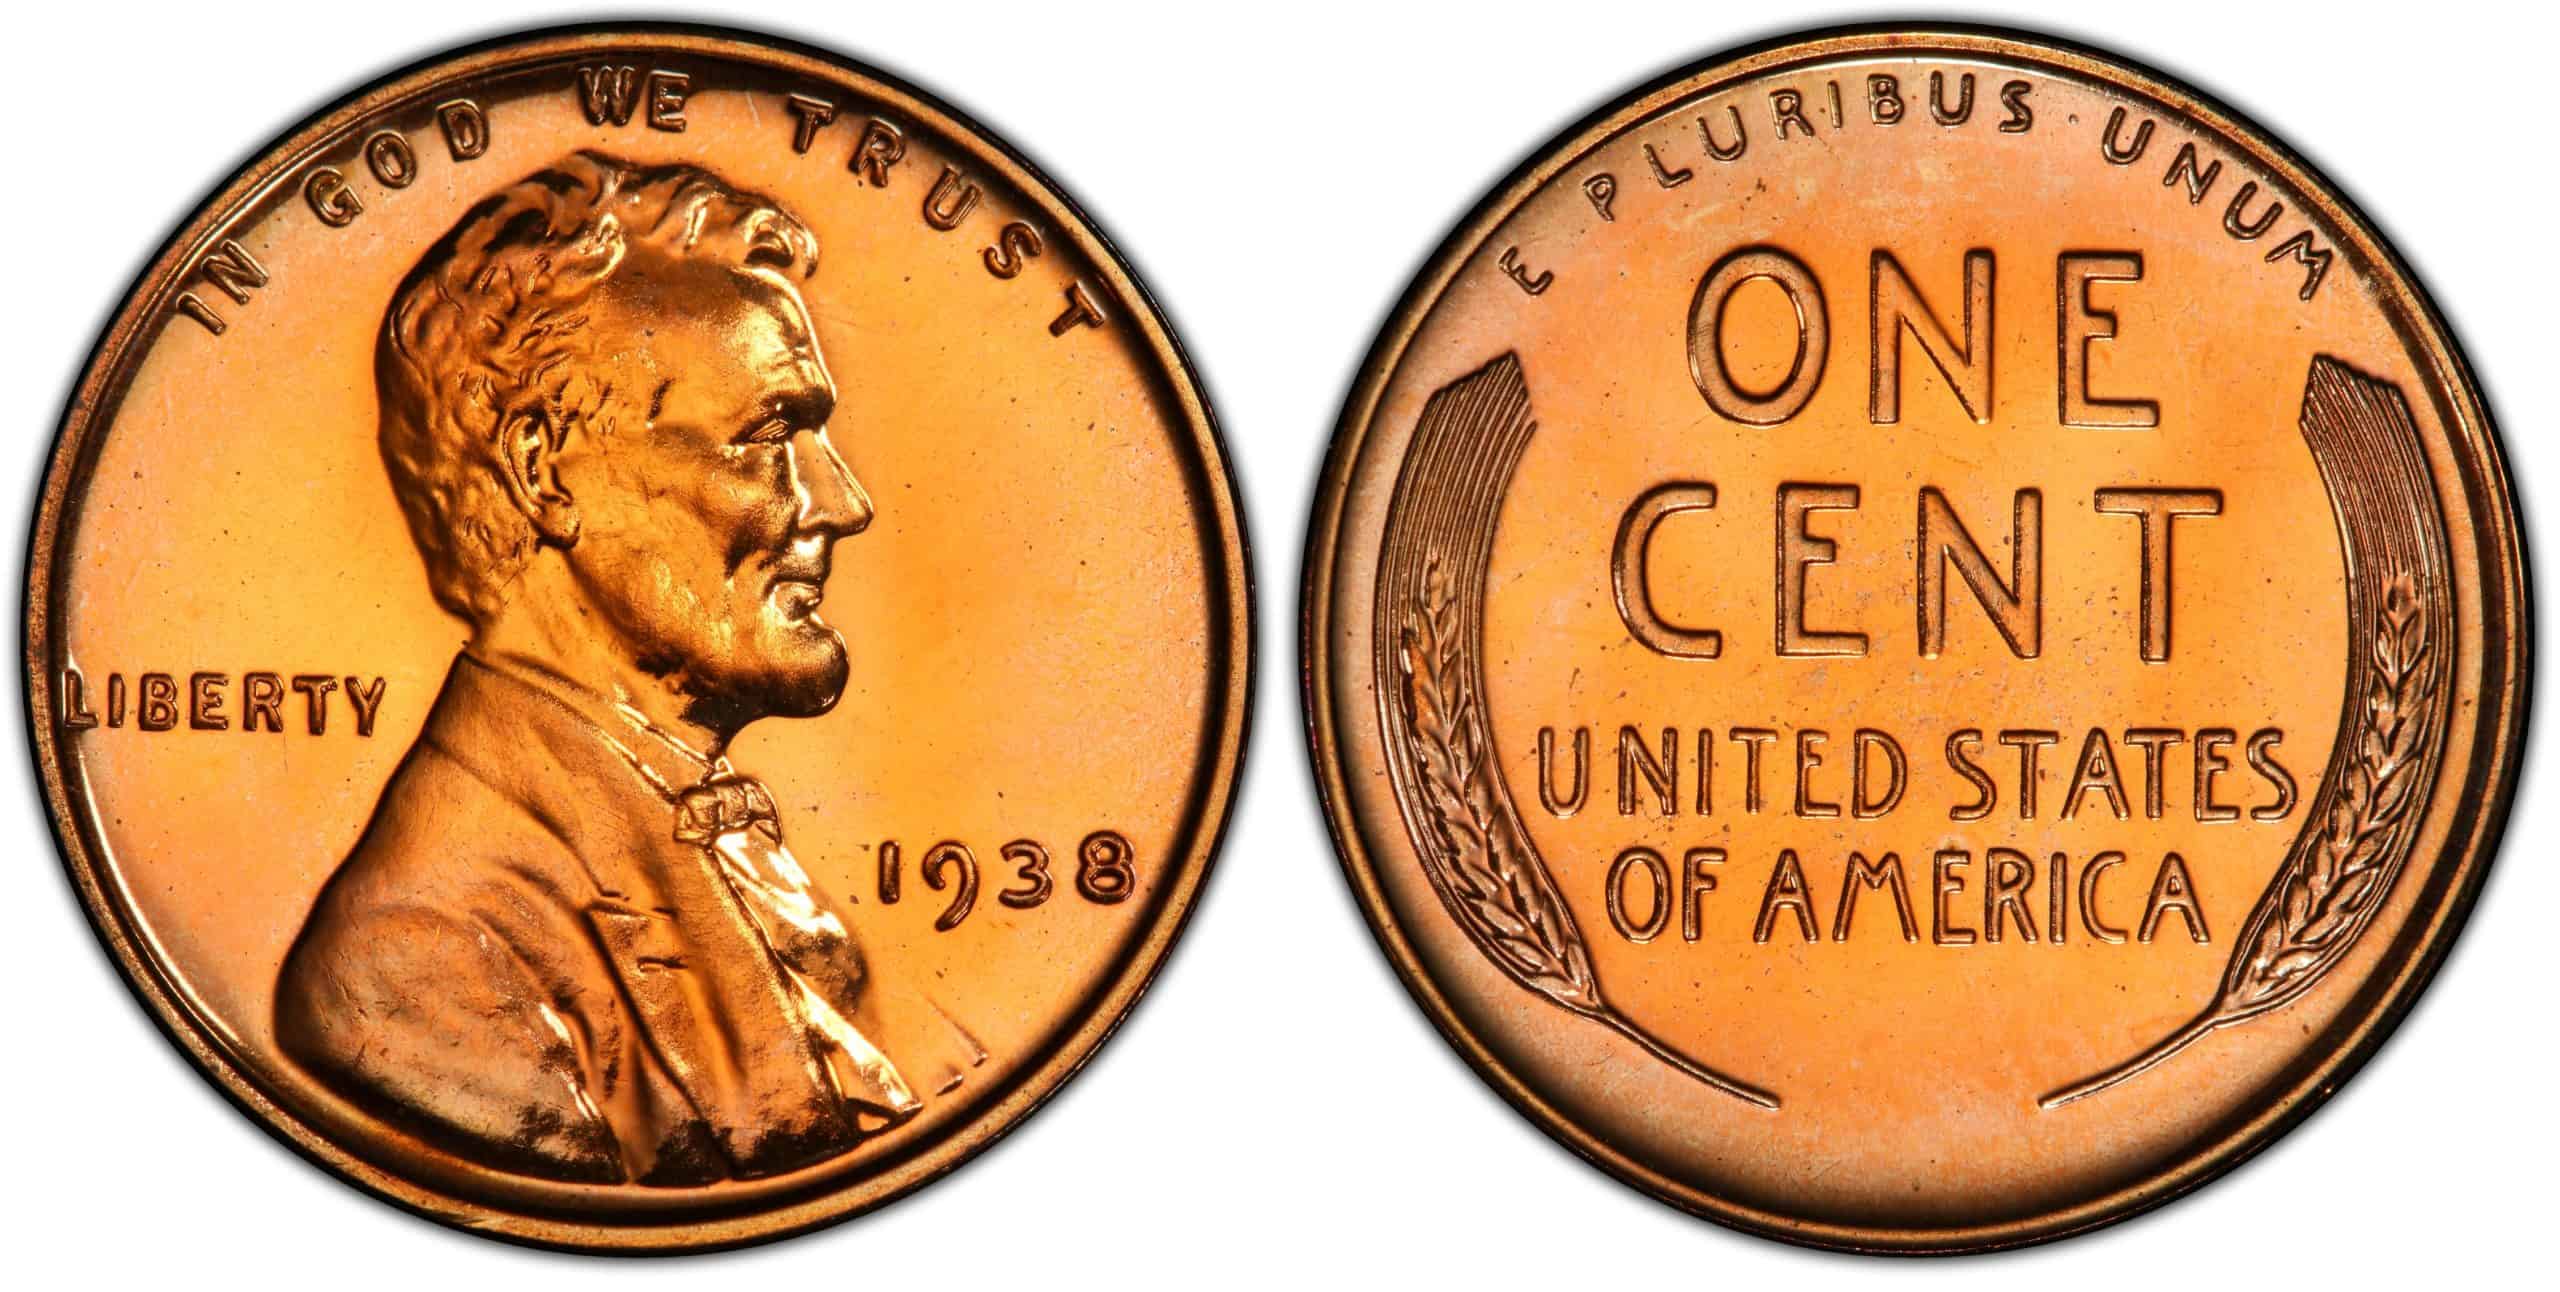 Features of 1938 Penny